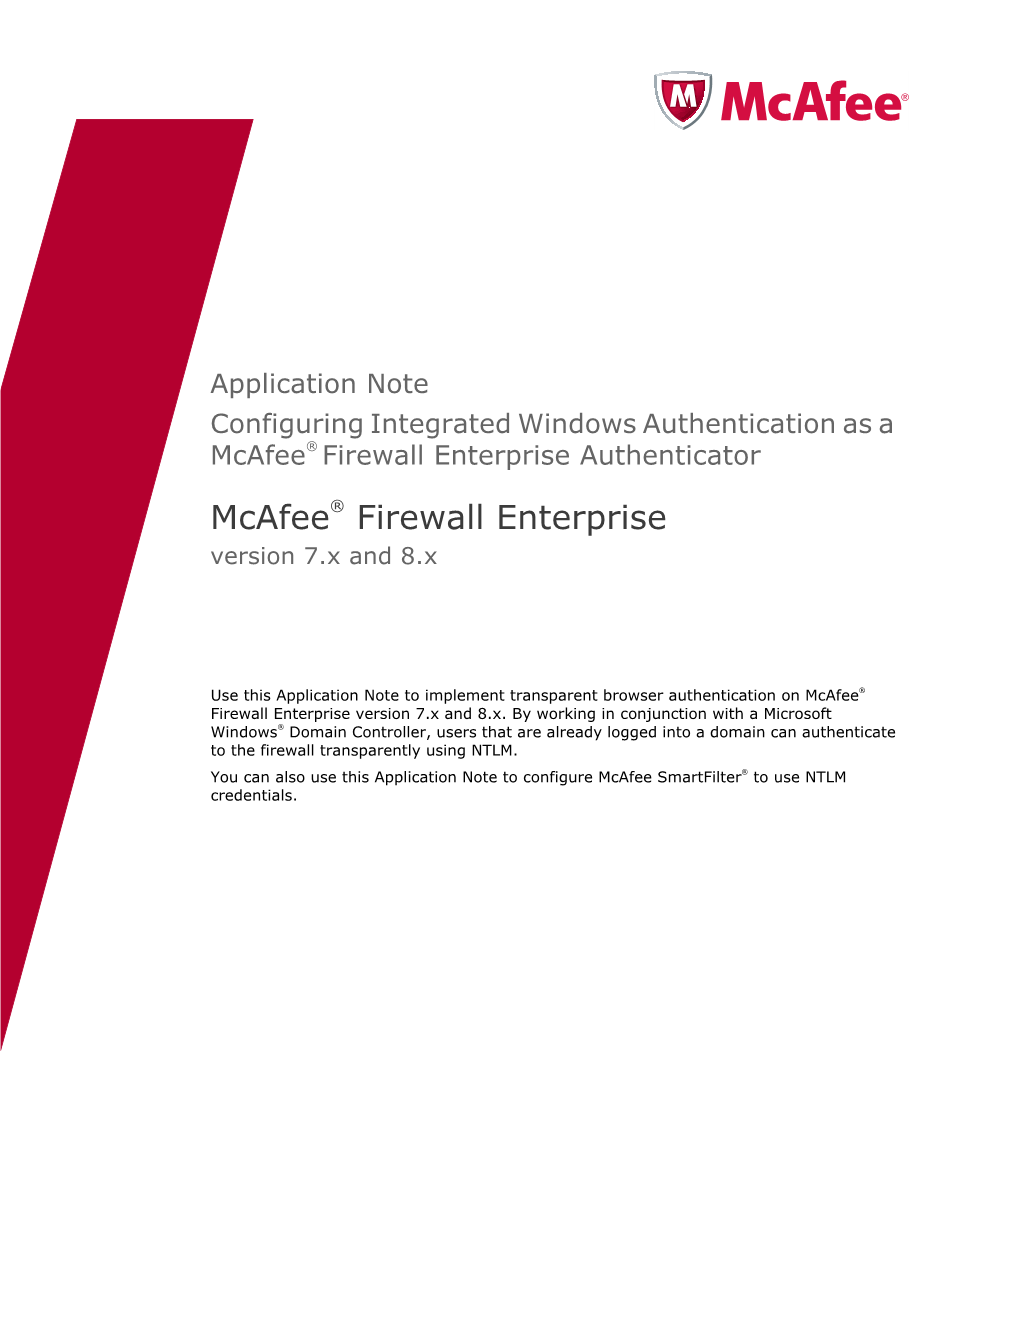 Application Note: Configuring Integrated Windows Authentication